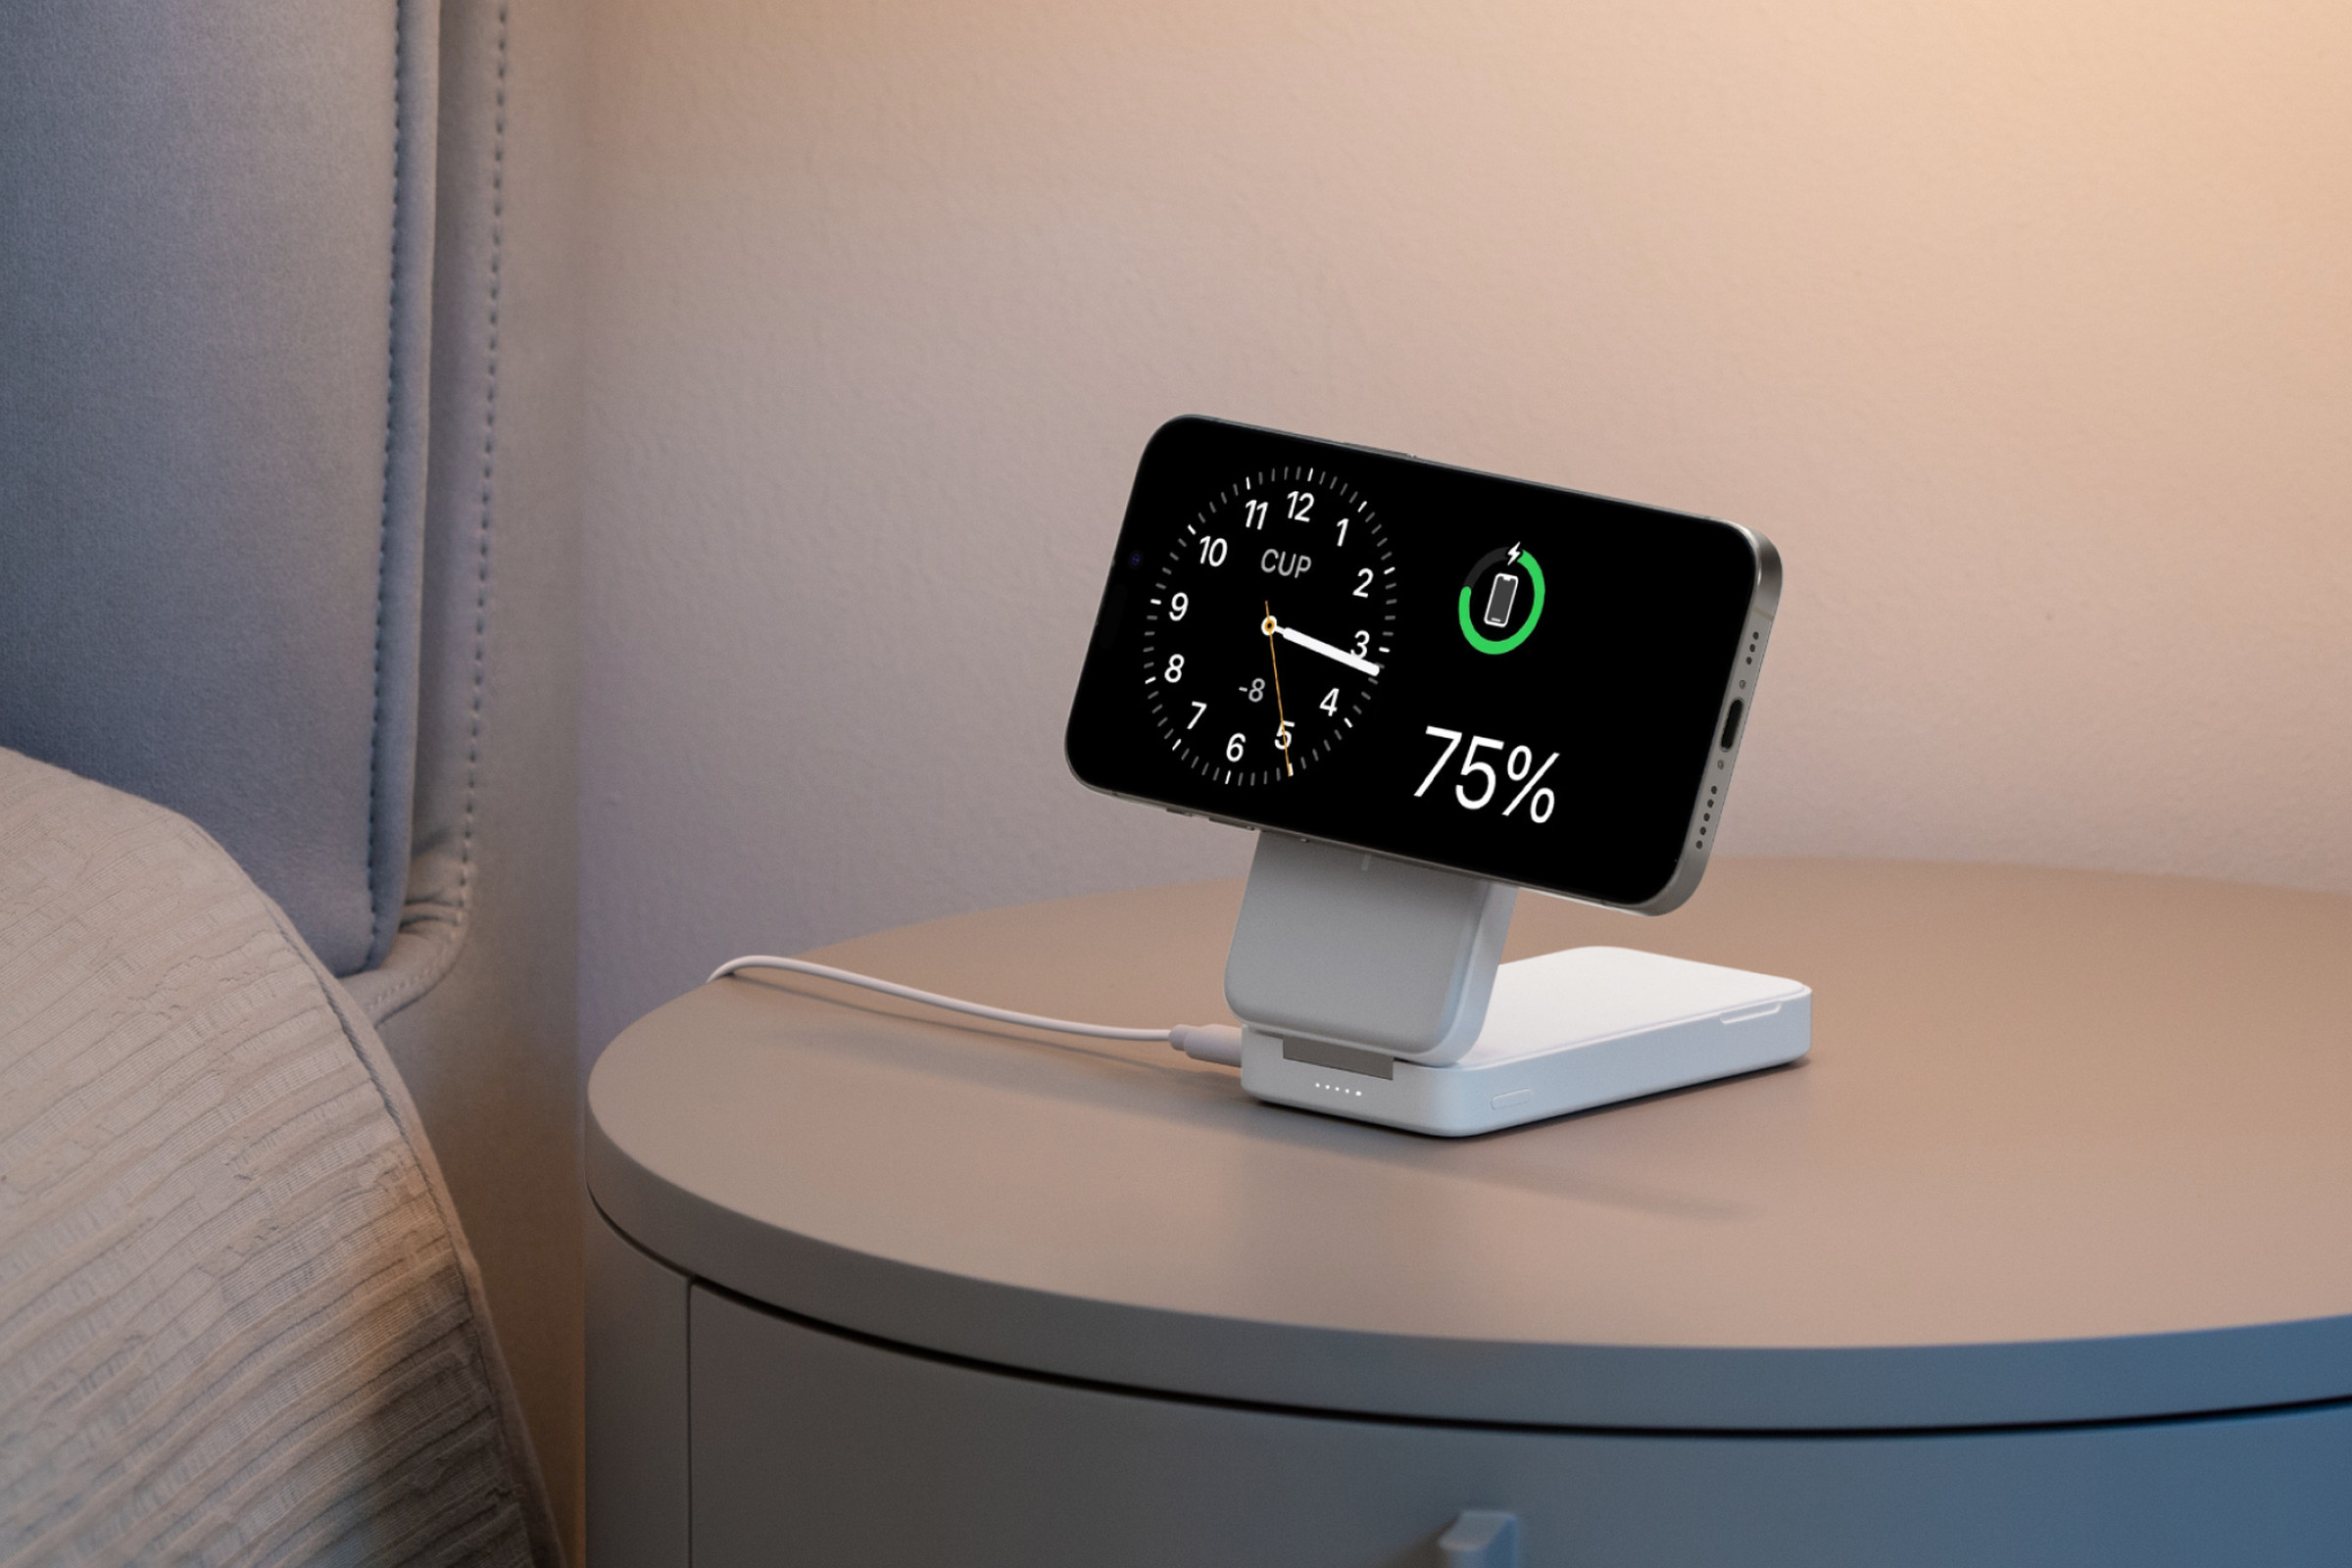 Anker MagGo charger sitting on nightstand